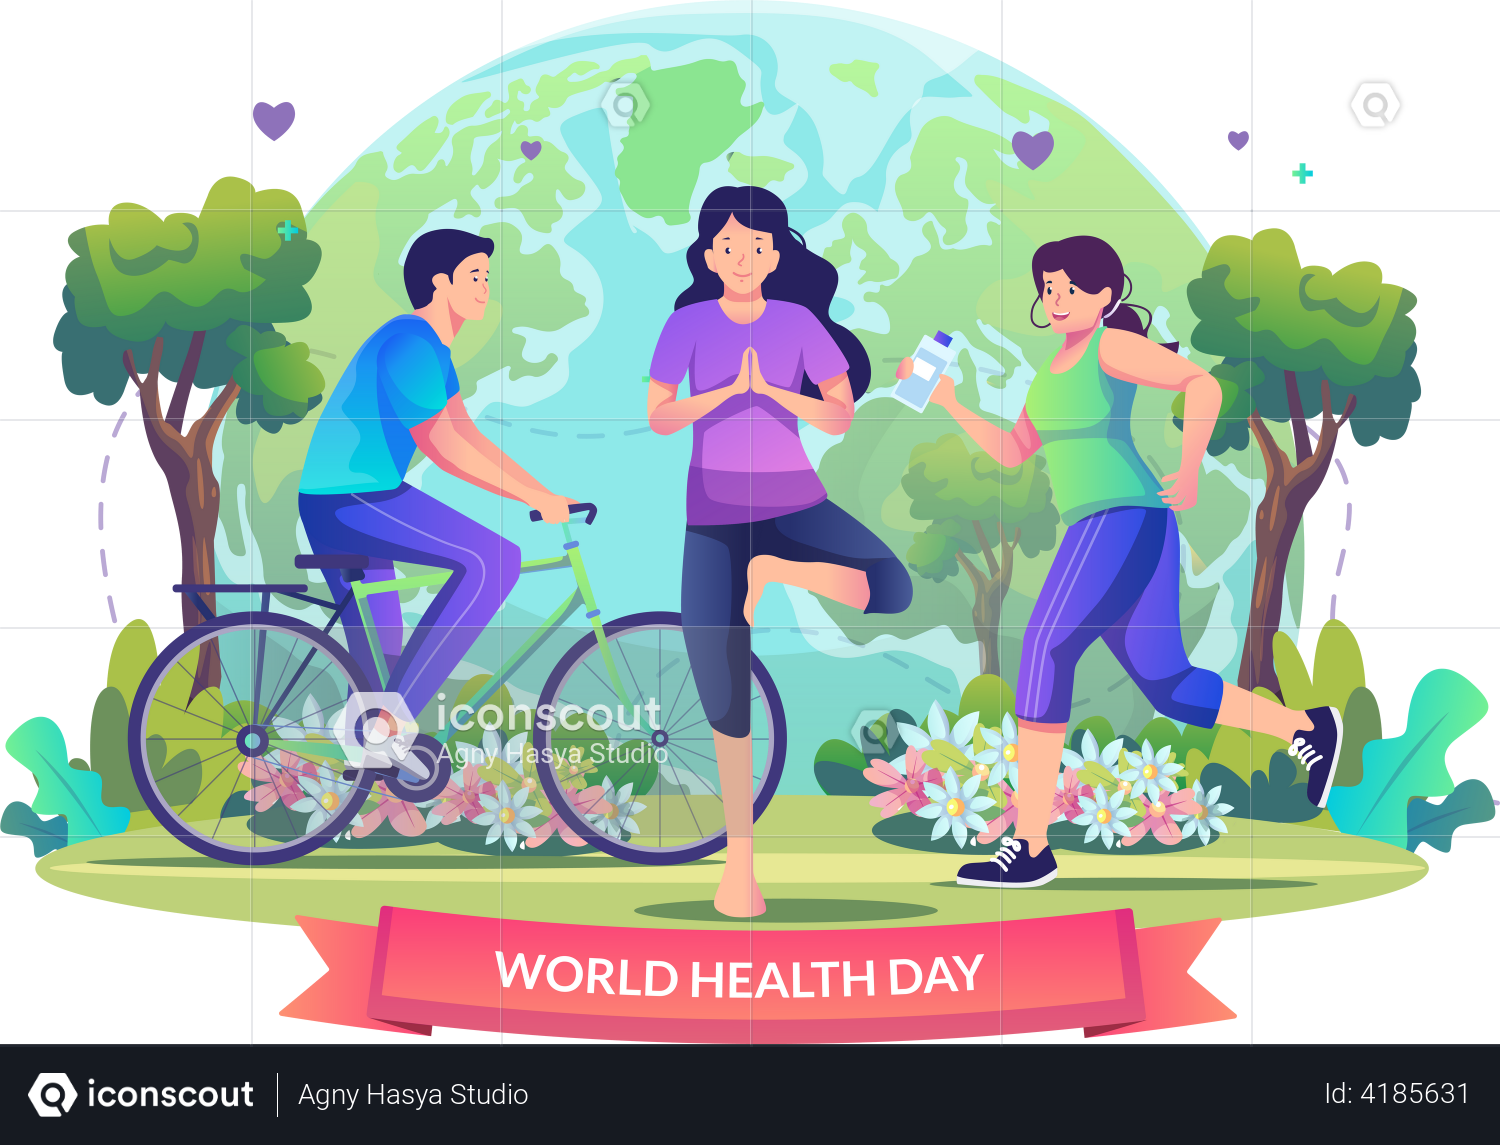 Universal Health Promoted on World Health Day